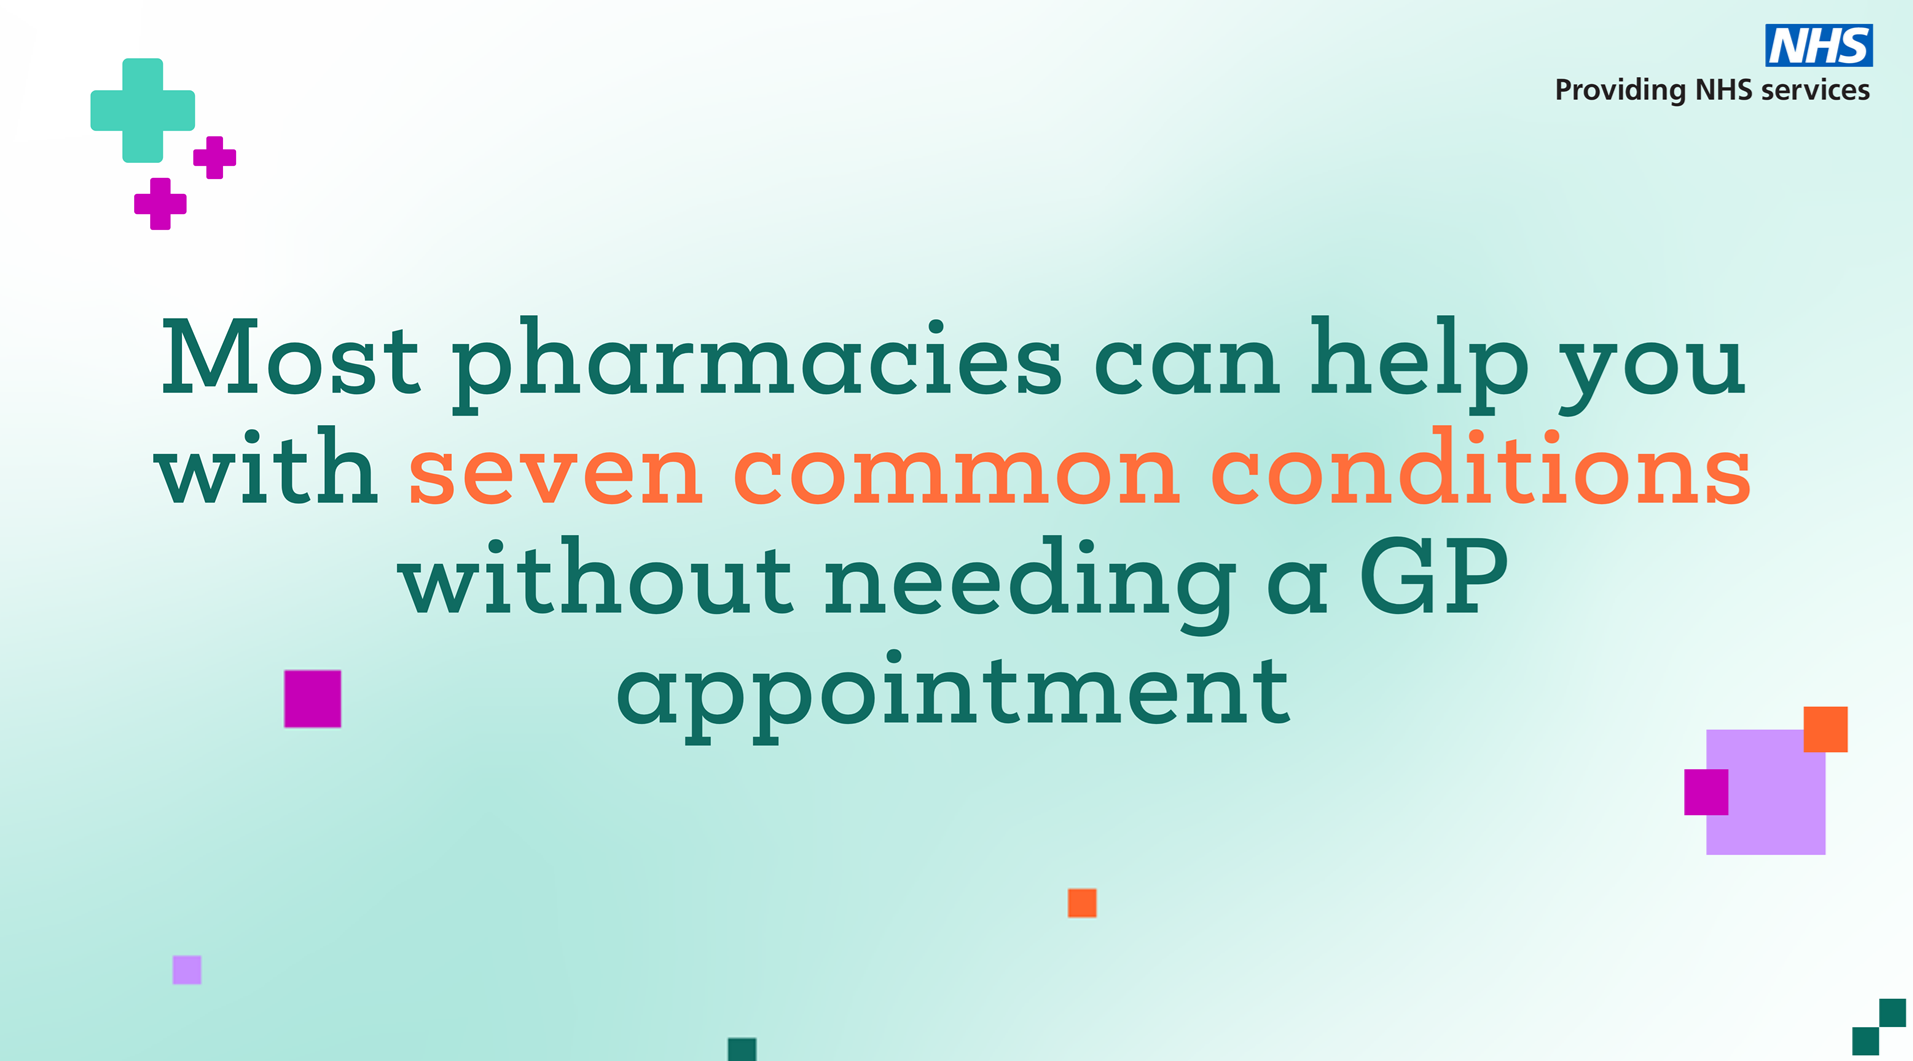 most pharmacies can help with 7 common ailments